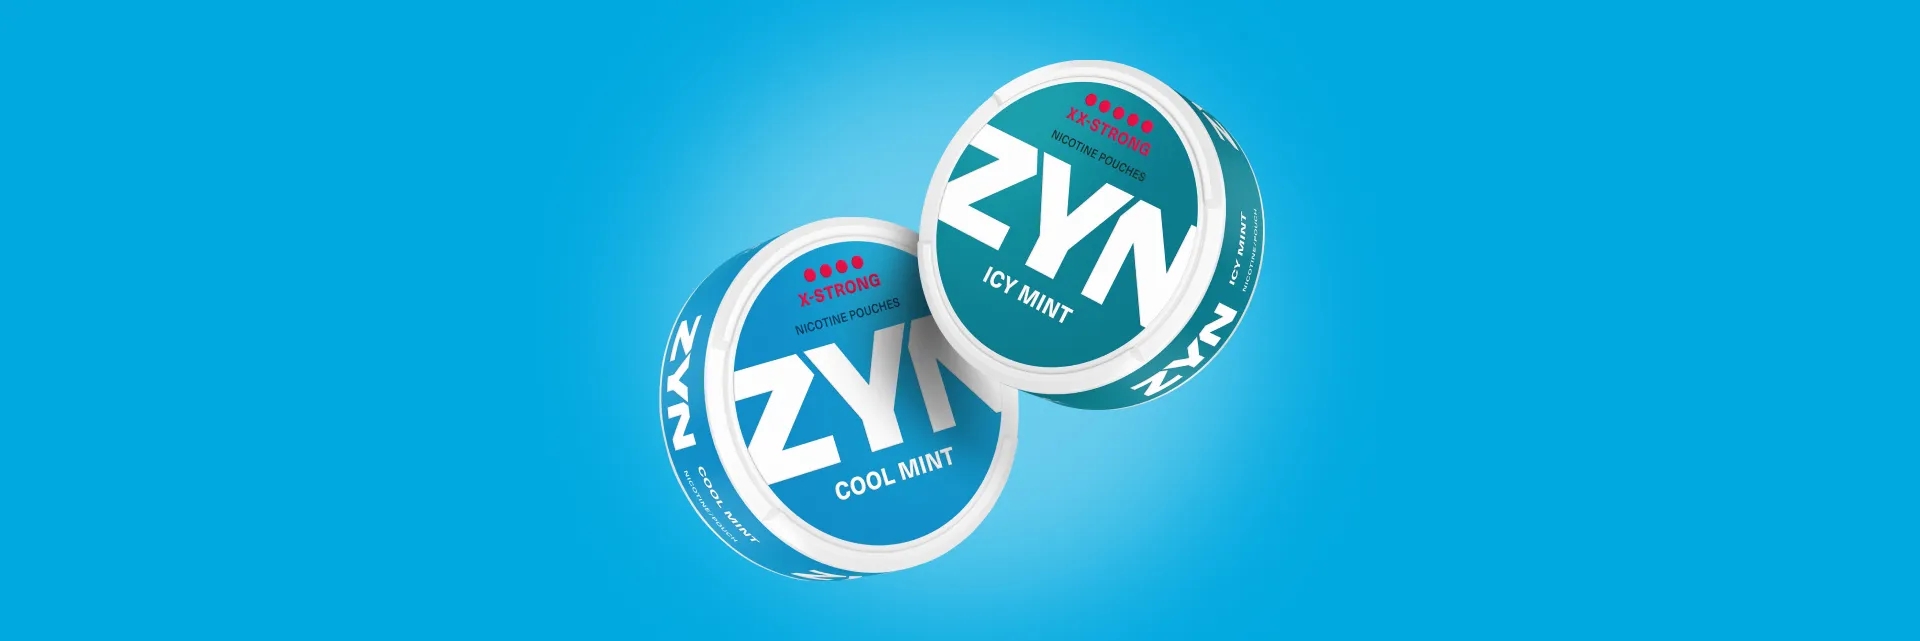 all-about-zyn-new-brand-nicotine-pads-in-ukraine